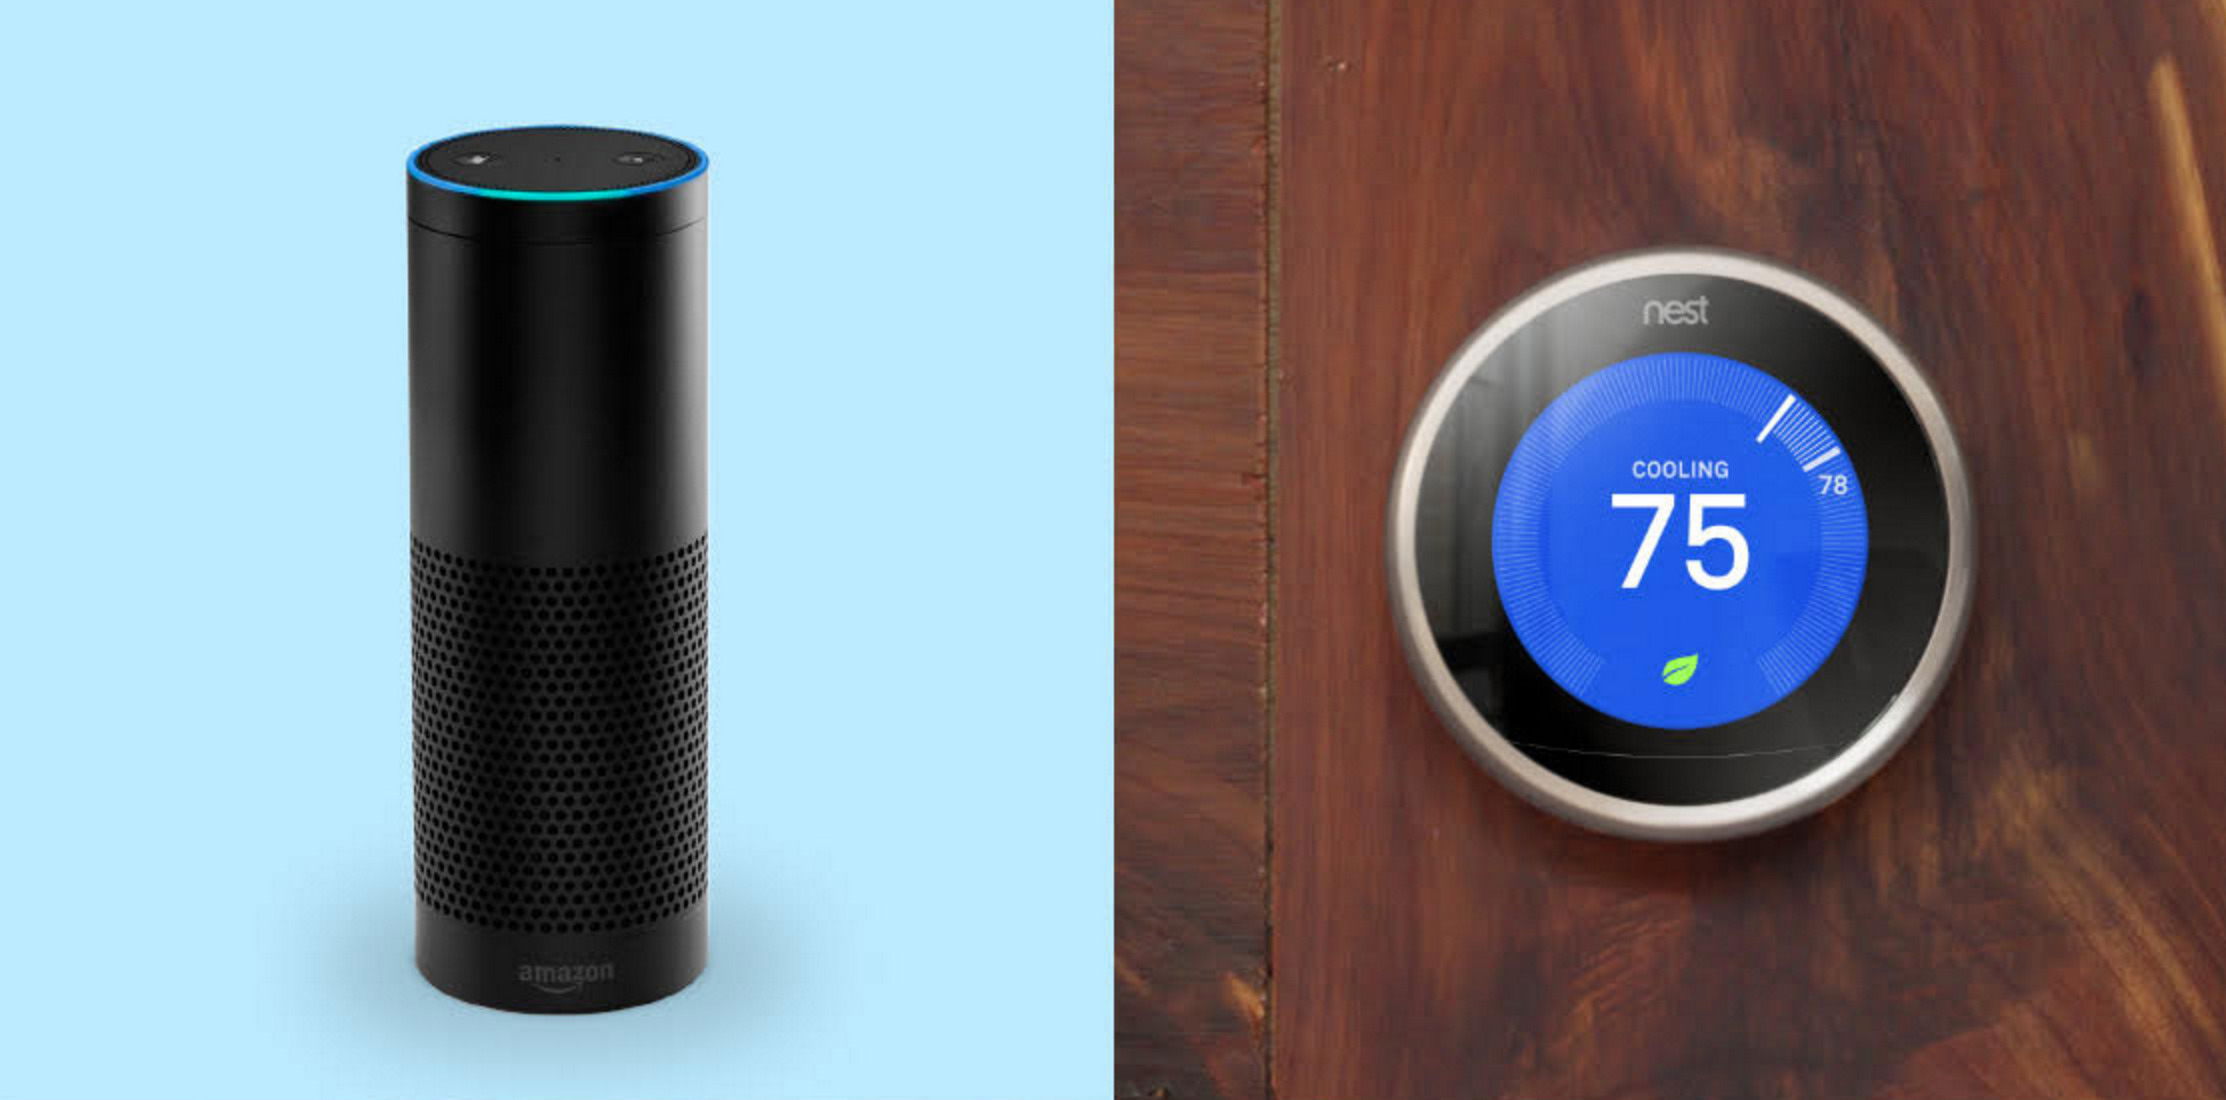 How To Pair Alexa With Nest